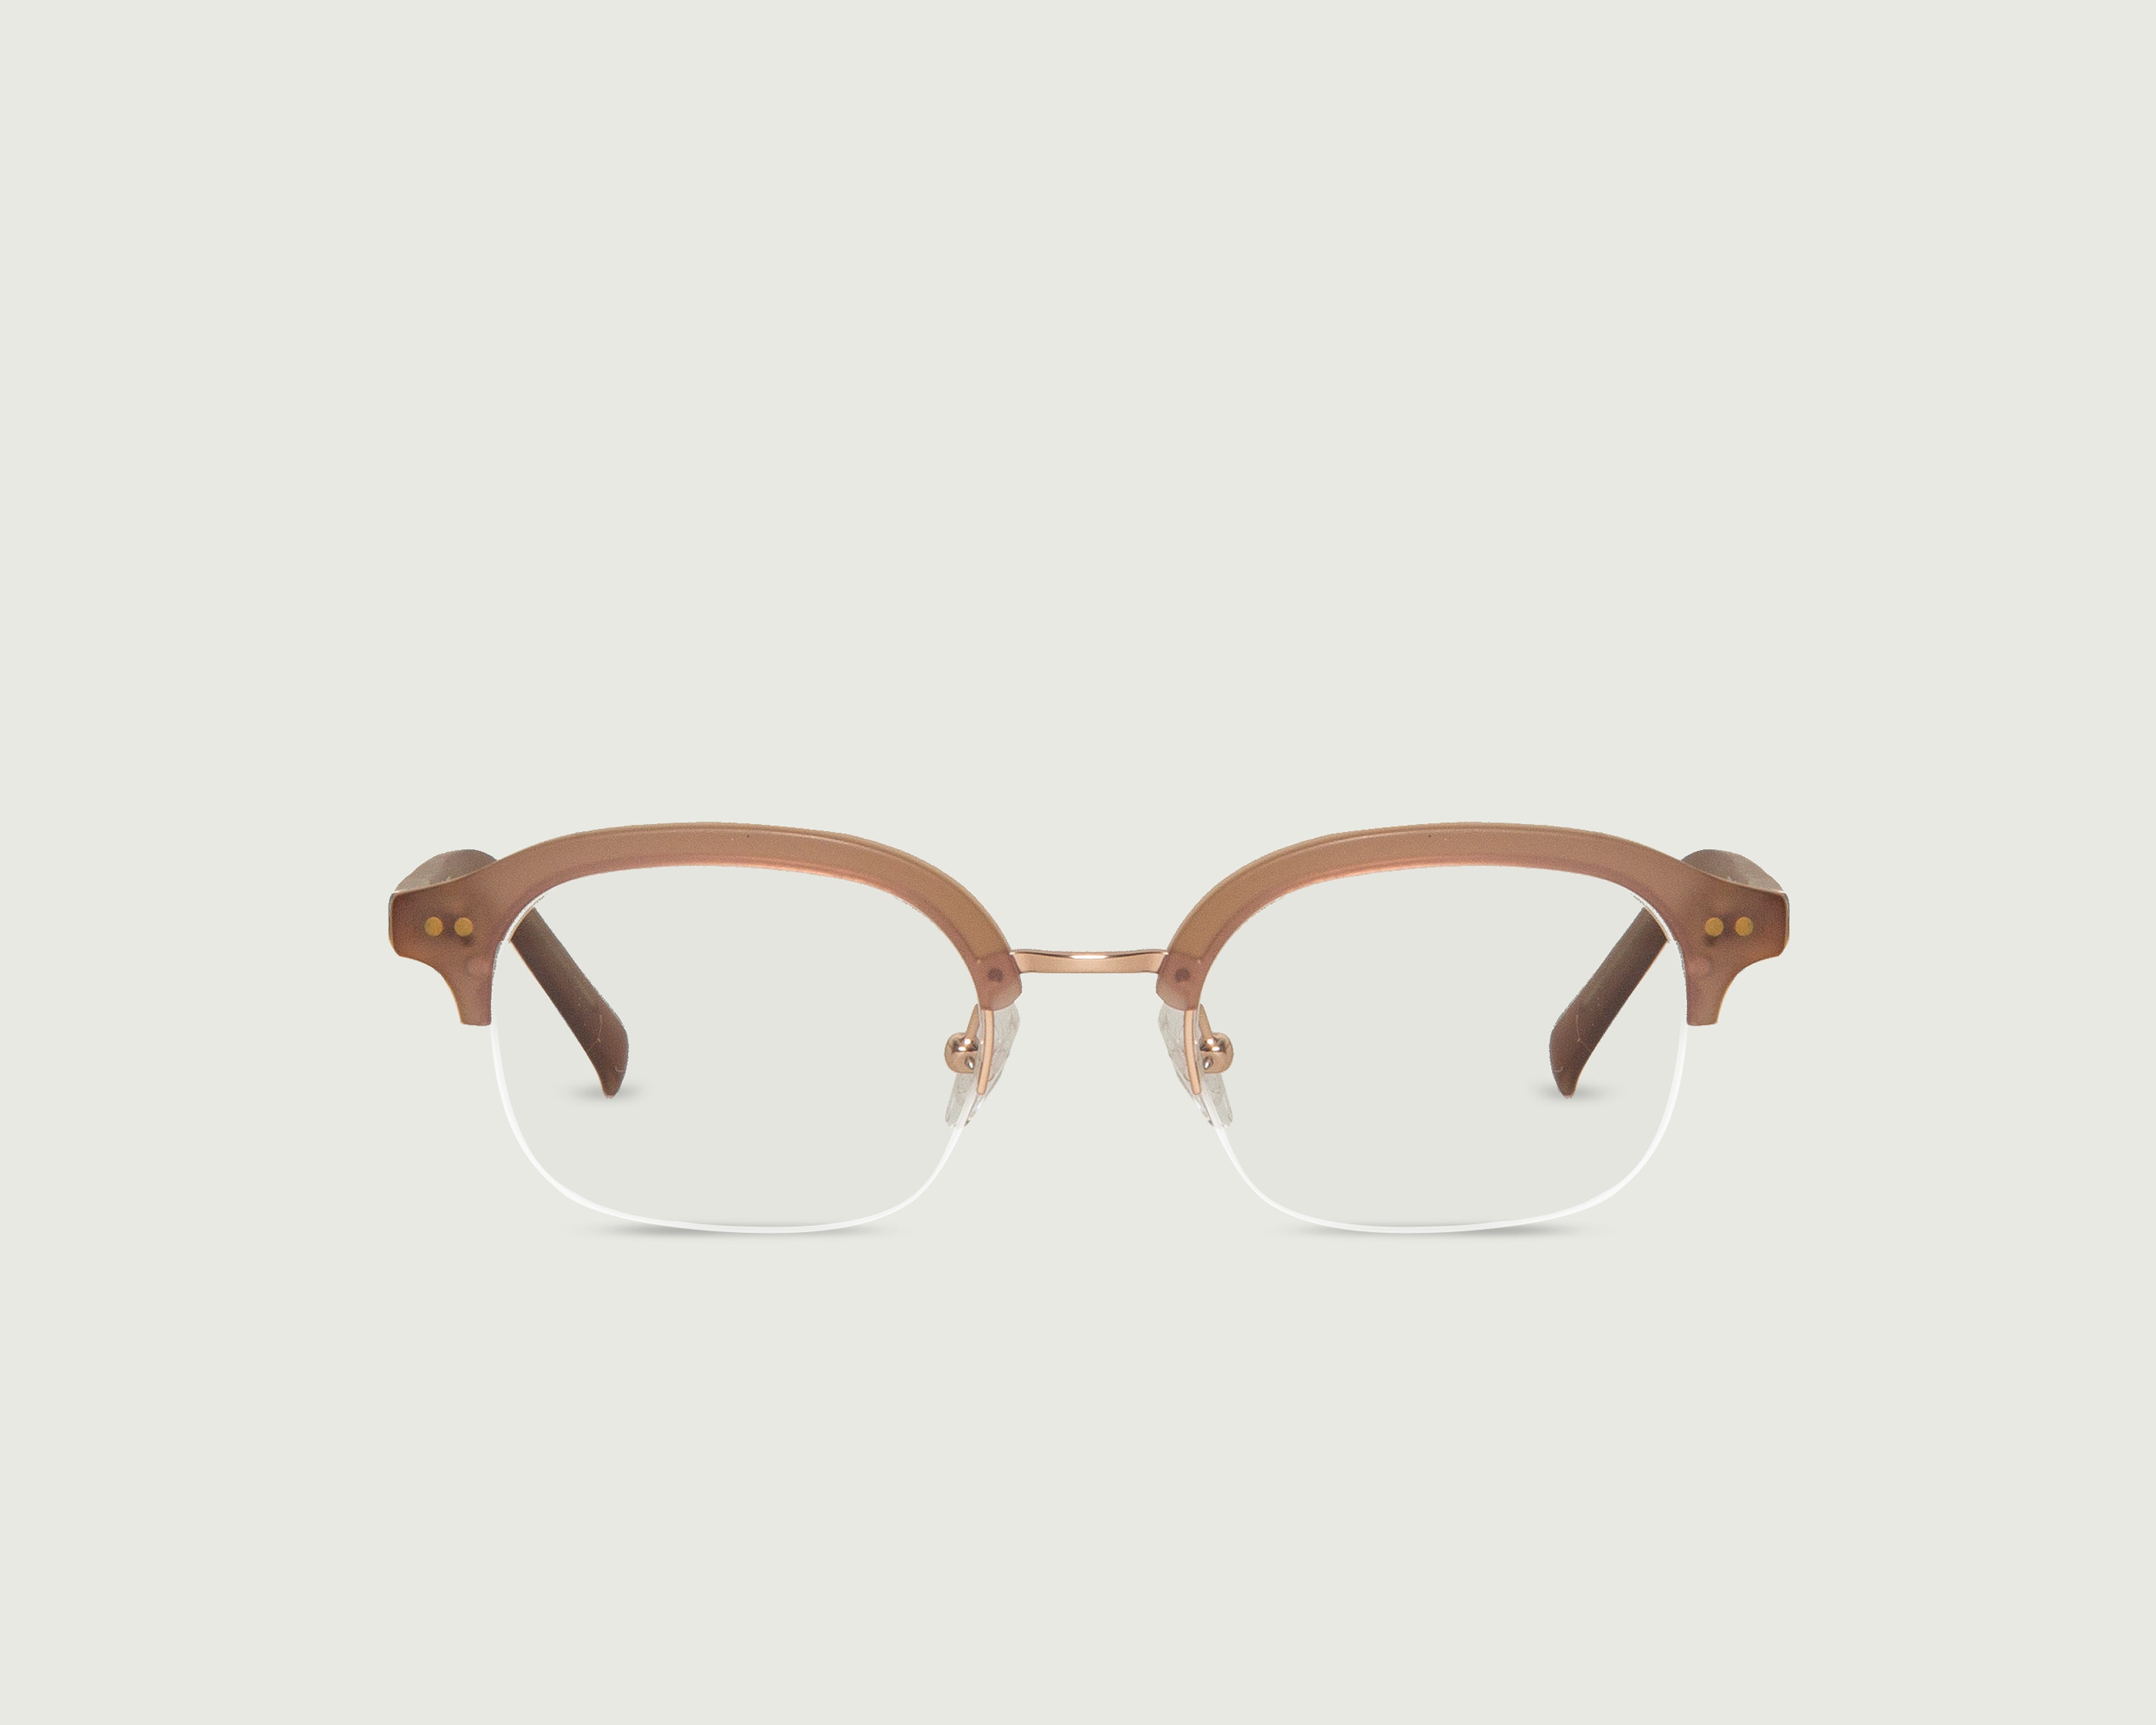 Wheat::Gregor Eyeglasses browline taupe acetate front (6662837338166)